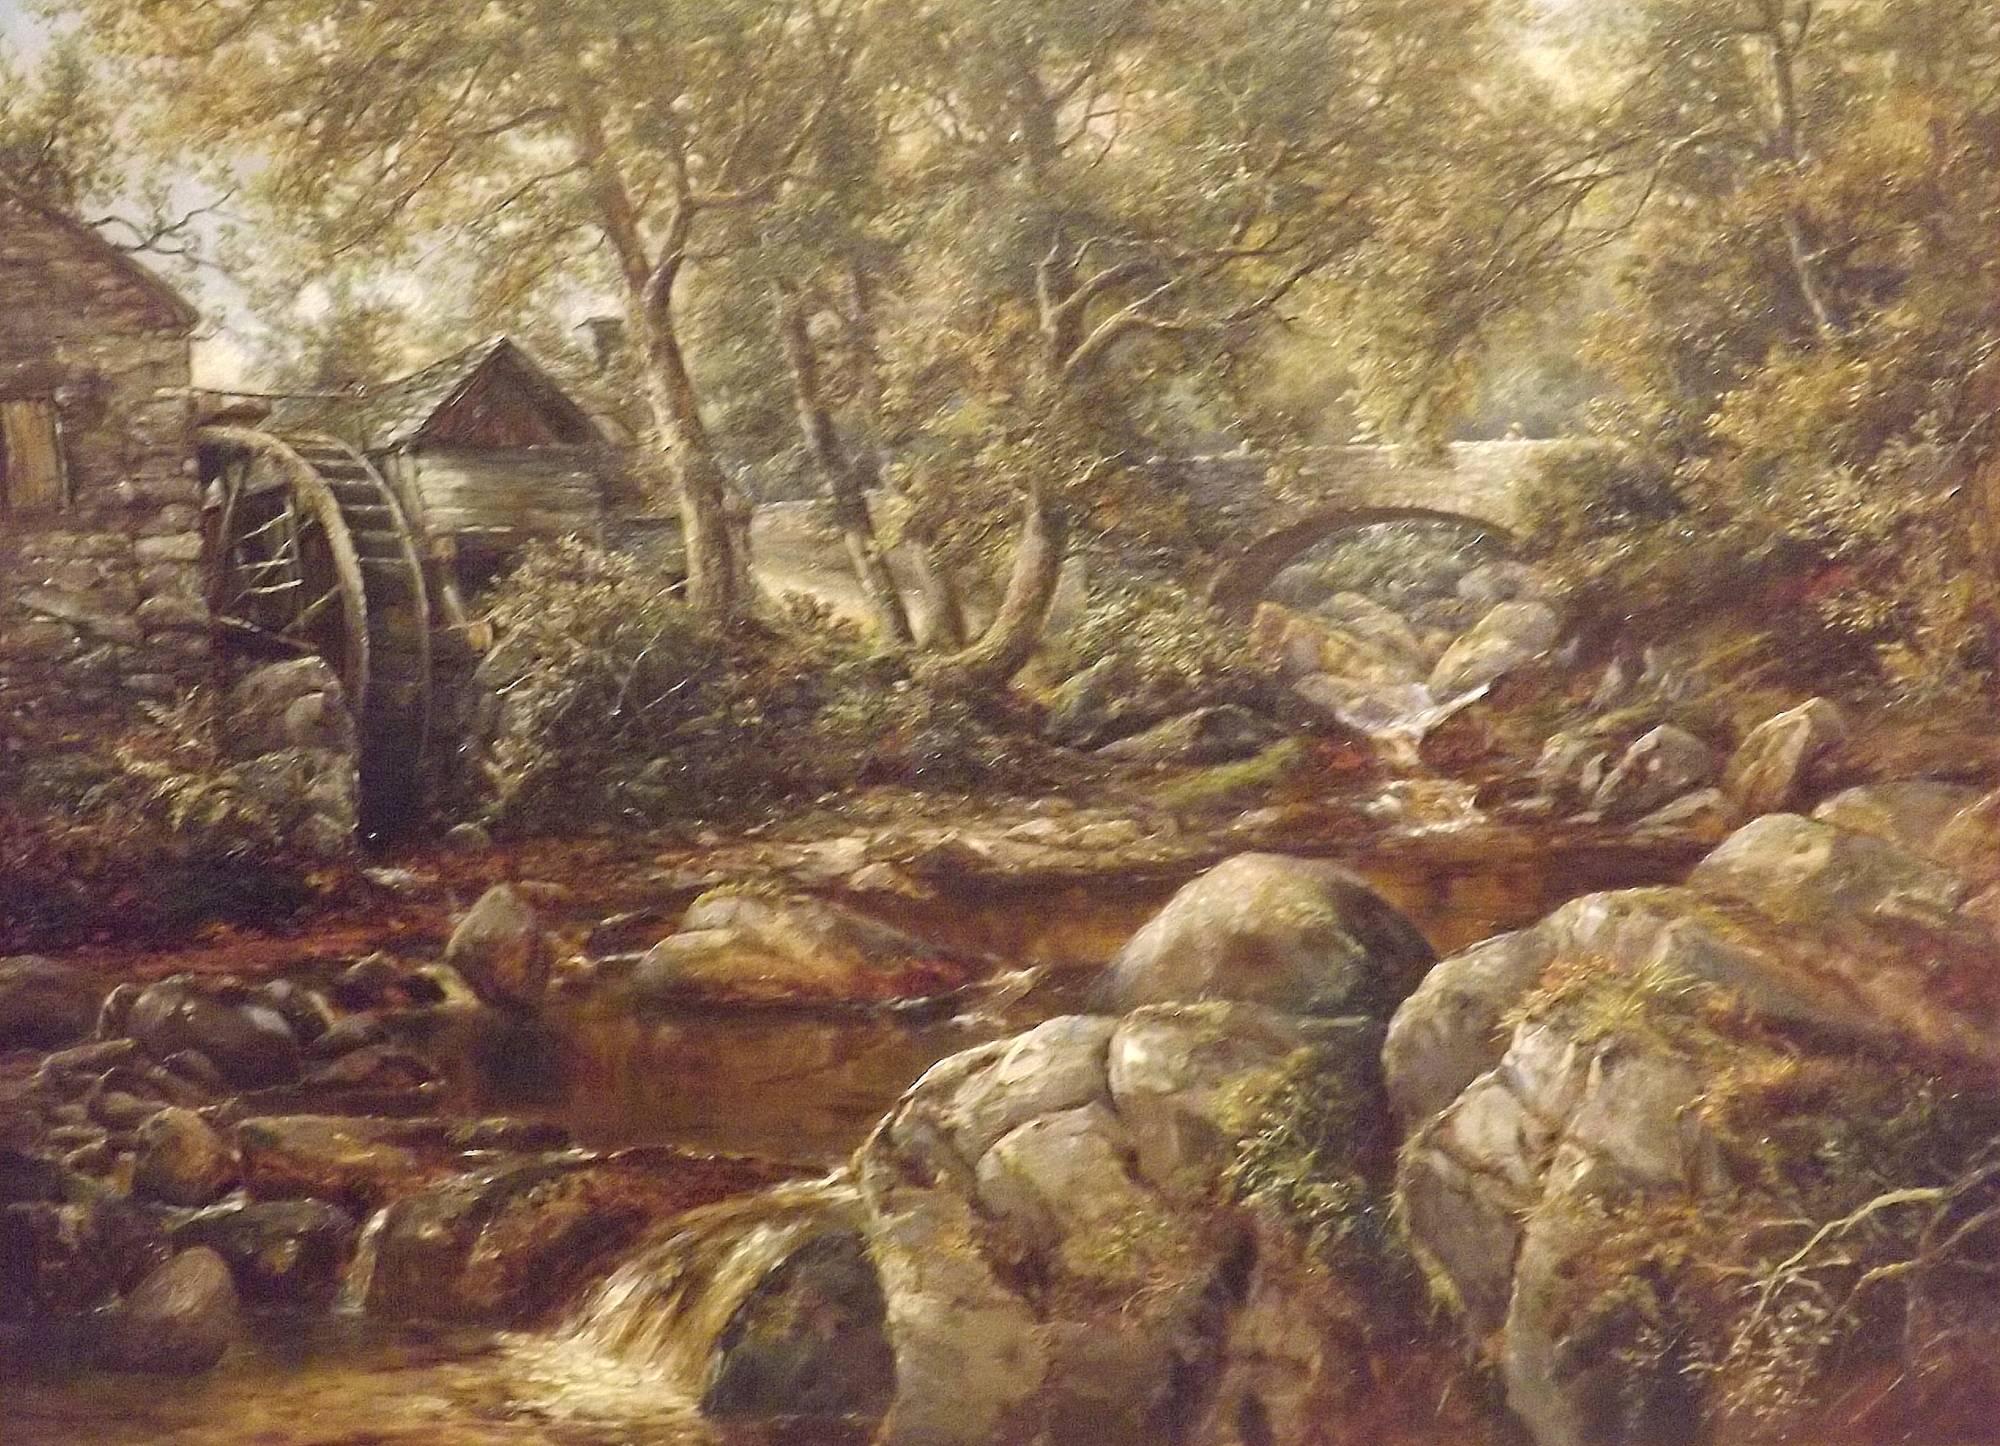 "Capel Curig Mill North Wales" by William Henry Waring. Oil on Canvas. Birmingham painter and exhibitor at the R.B.S.A 1886-1910. Signed and dated 1903.

Dimensions:
Width 36" (92cm).
Height 28" (71cm).

All of the items